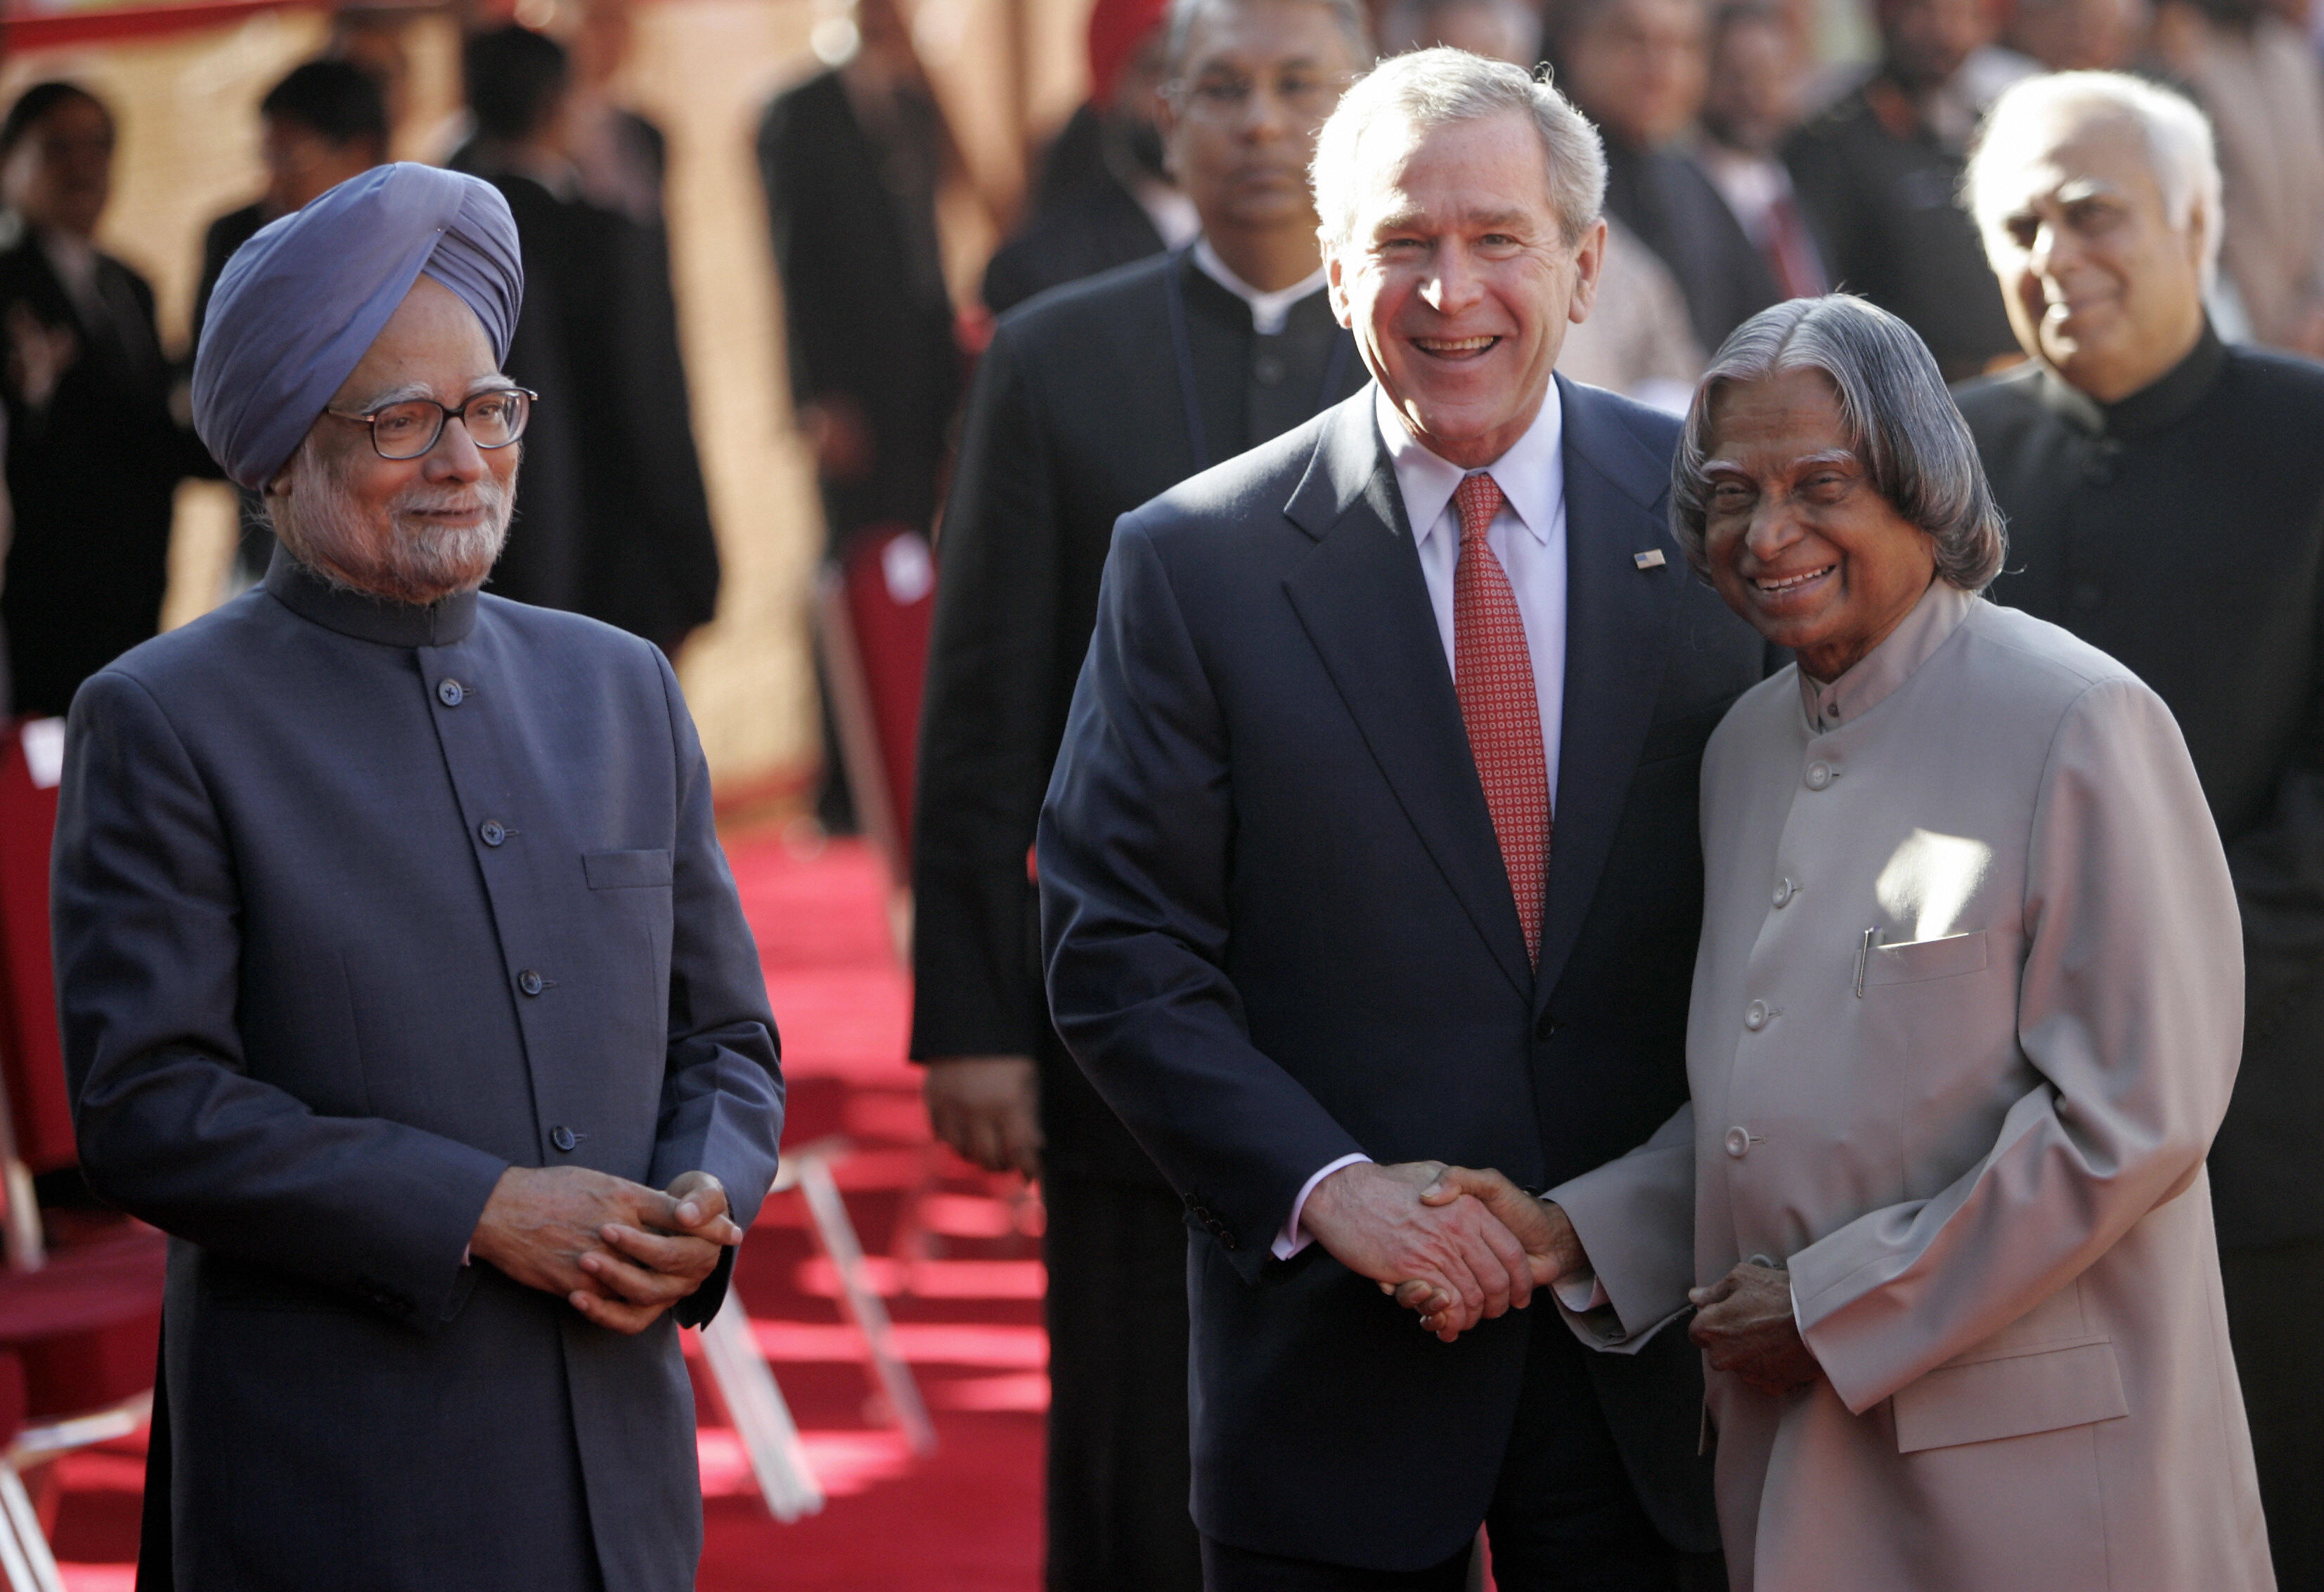 U.S. President George W. Bush shakes hands with Indian President A.P.J. Abdul Kalam while Prime Minister Manmohan Singh looks on during an official welcoming ceremony at the Presidential Palace in New Delhi on March 2, 2006. (Emmanuel Dunand–AFP/Getty Images)